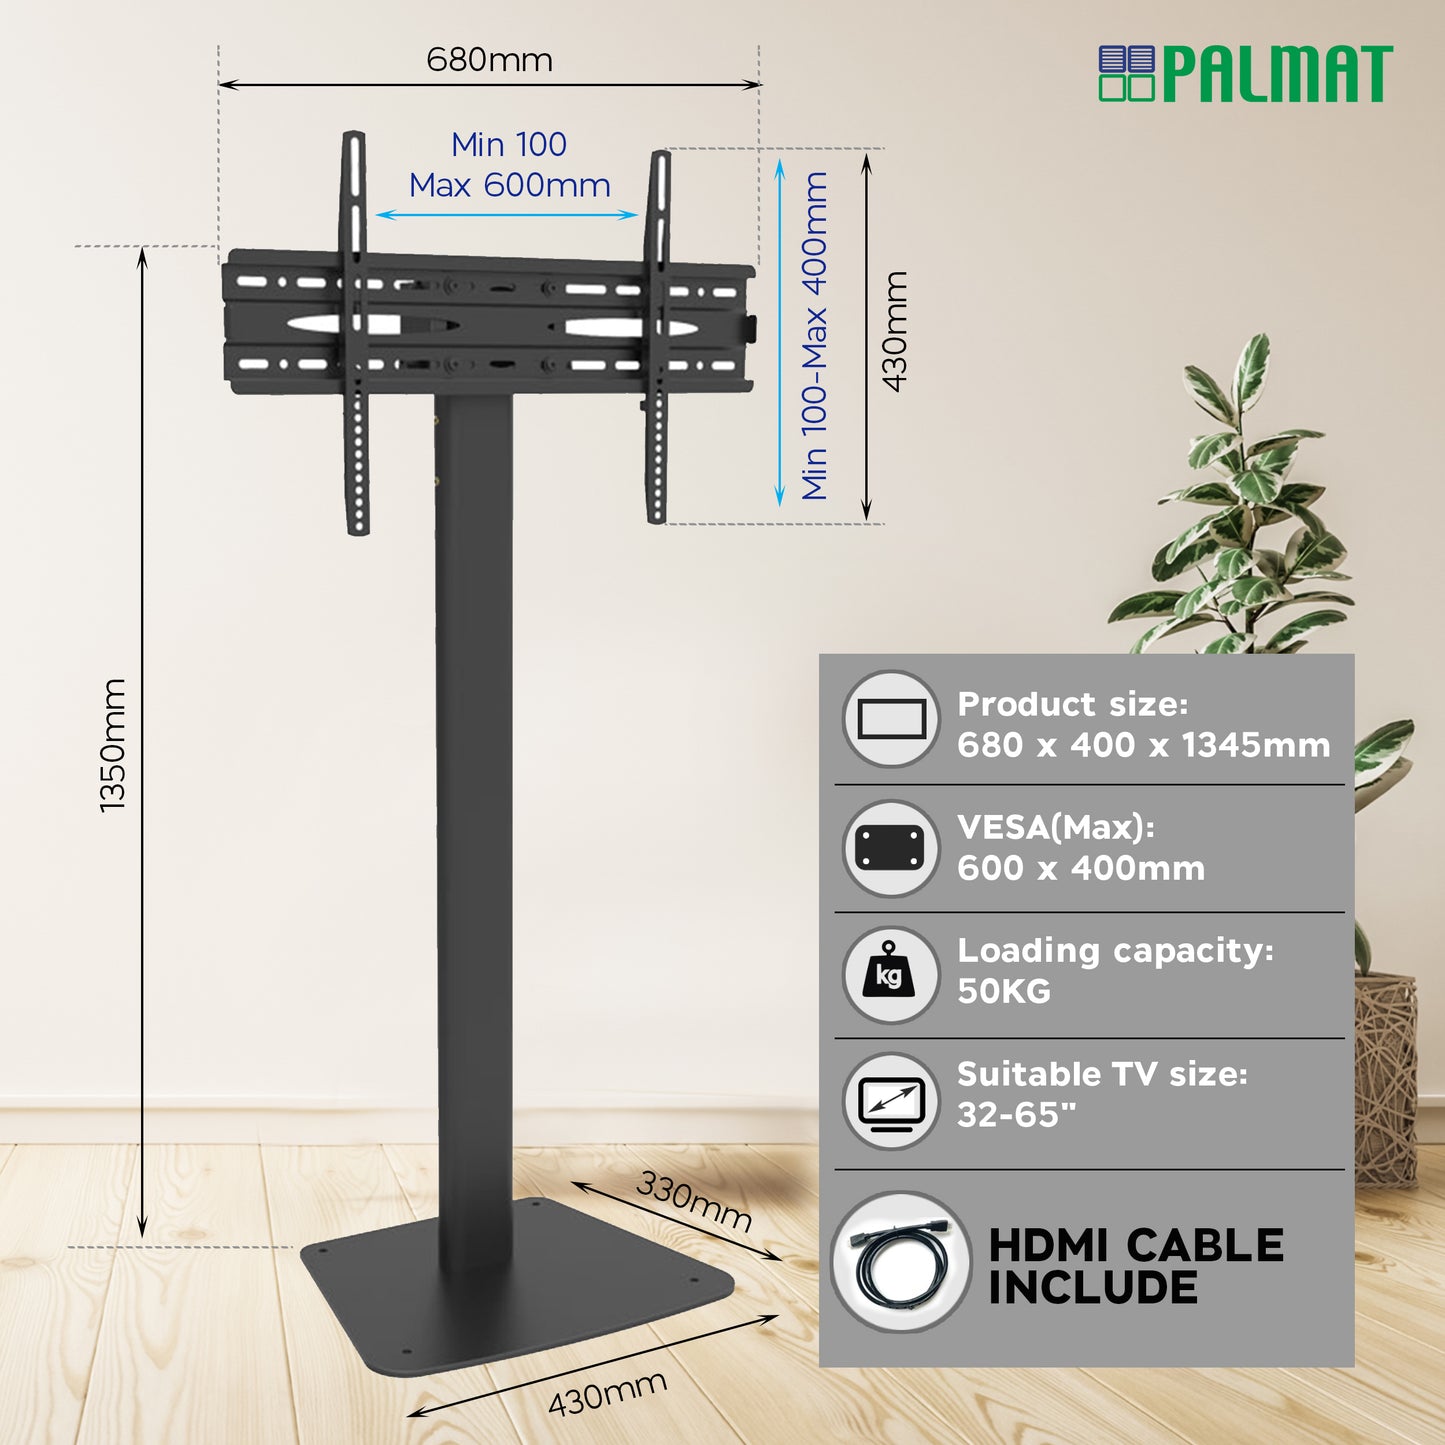 PALMAT Universal Floor TV Stand with Mount and Wire Management | Adjustable Television Stand for 32” to 65” Telly, Max 50KG